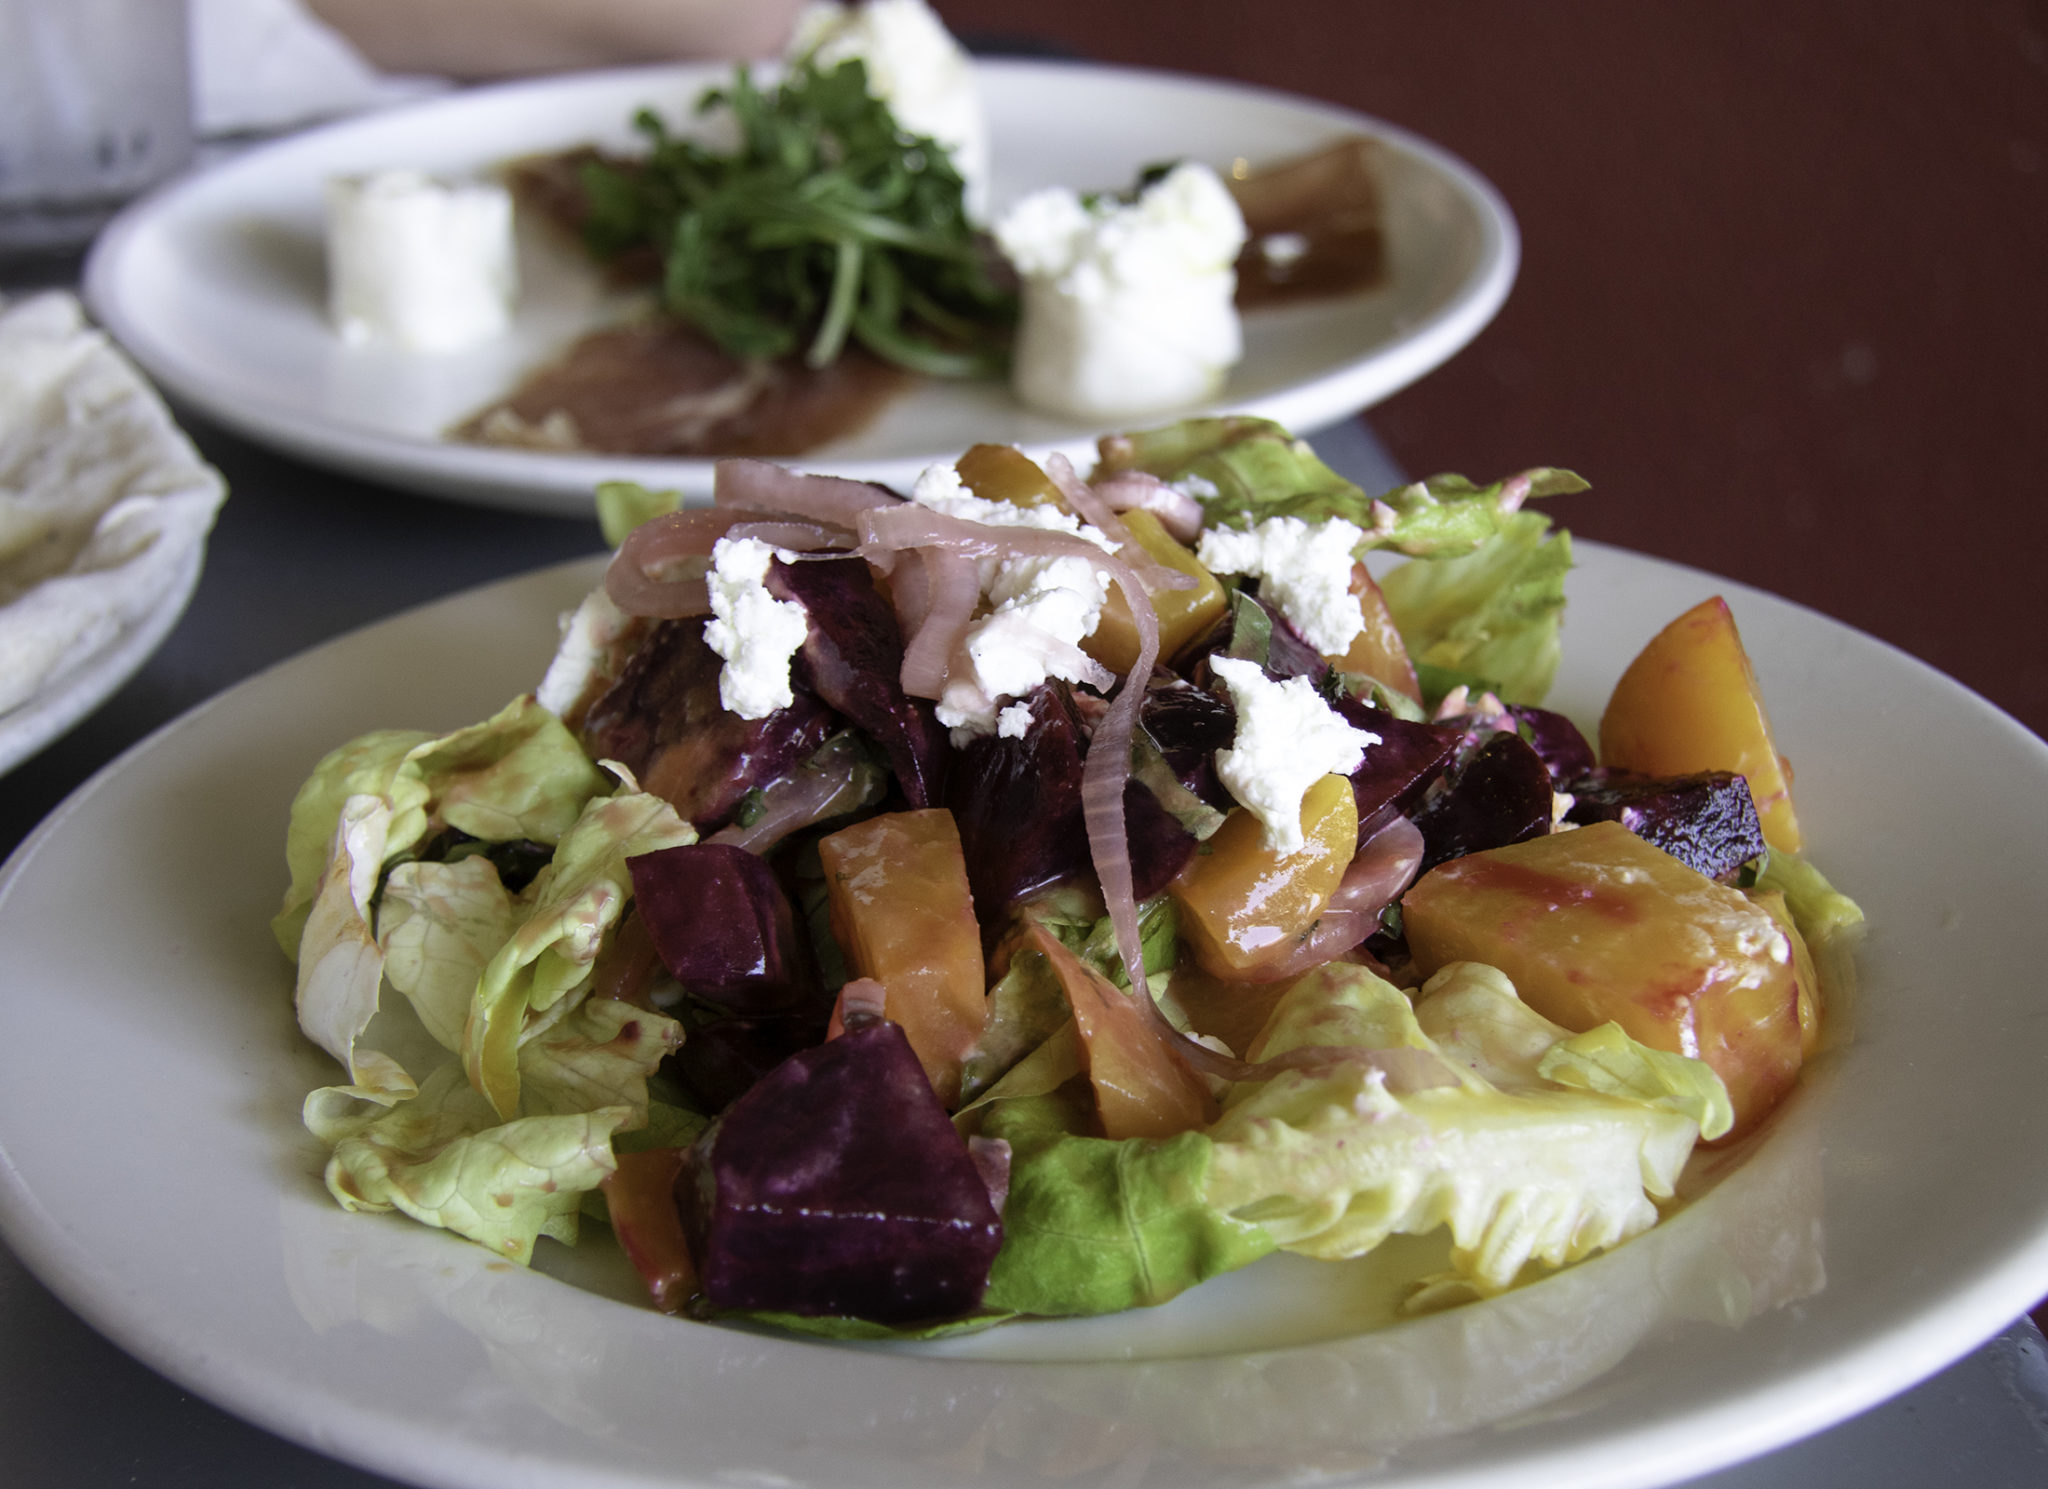 Beet salad at Rosso Pizzeria in Santa Rosa. The restaurant has reopened for patio dining. Heather Irwin/PD